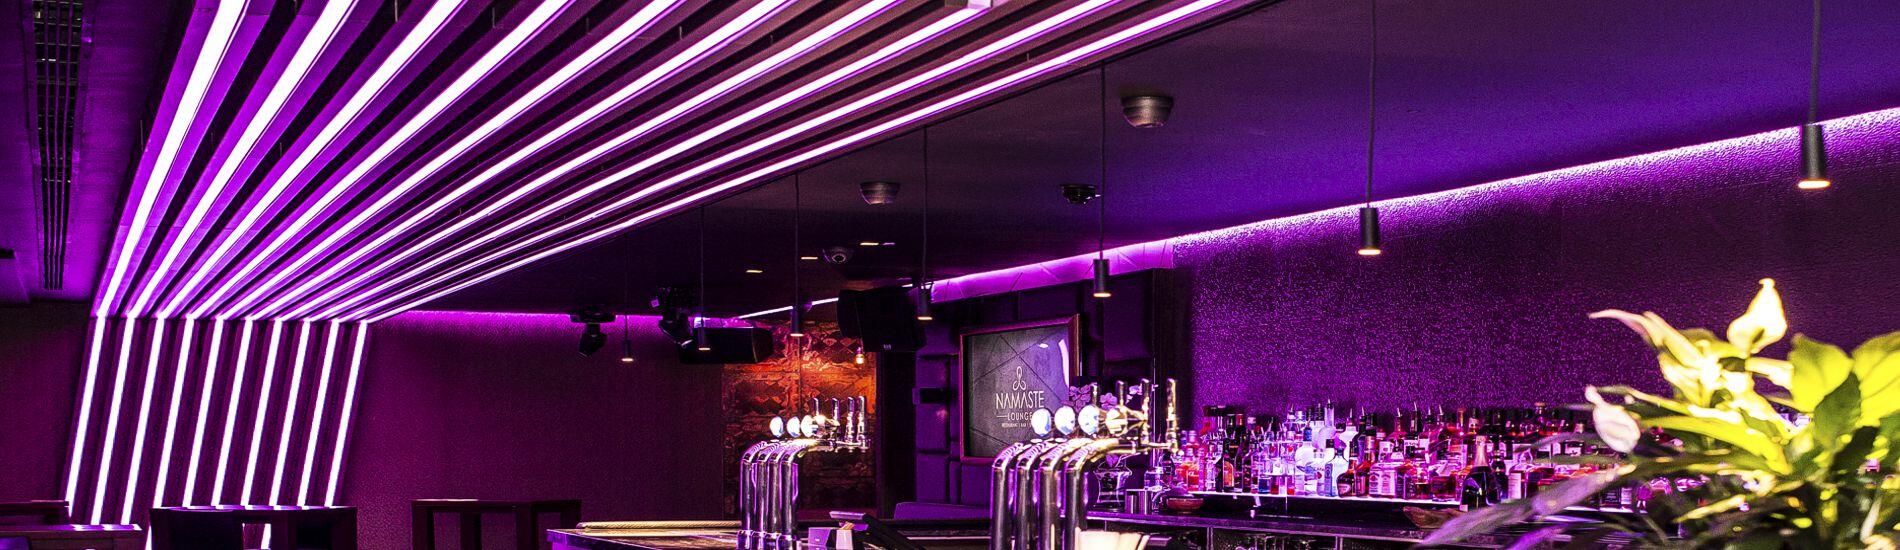 Lightweight MAXI Beam With Integrated Lighting Create Dynamic Effect in Restaurant Bar